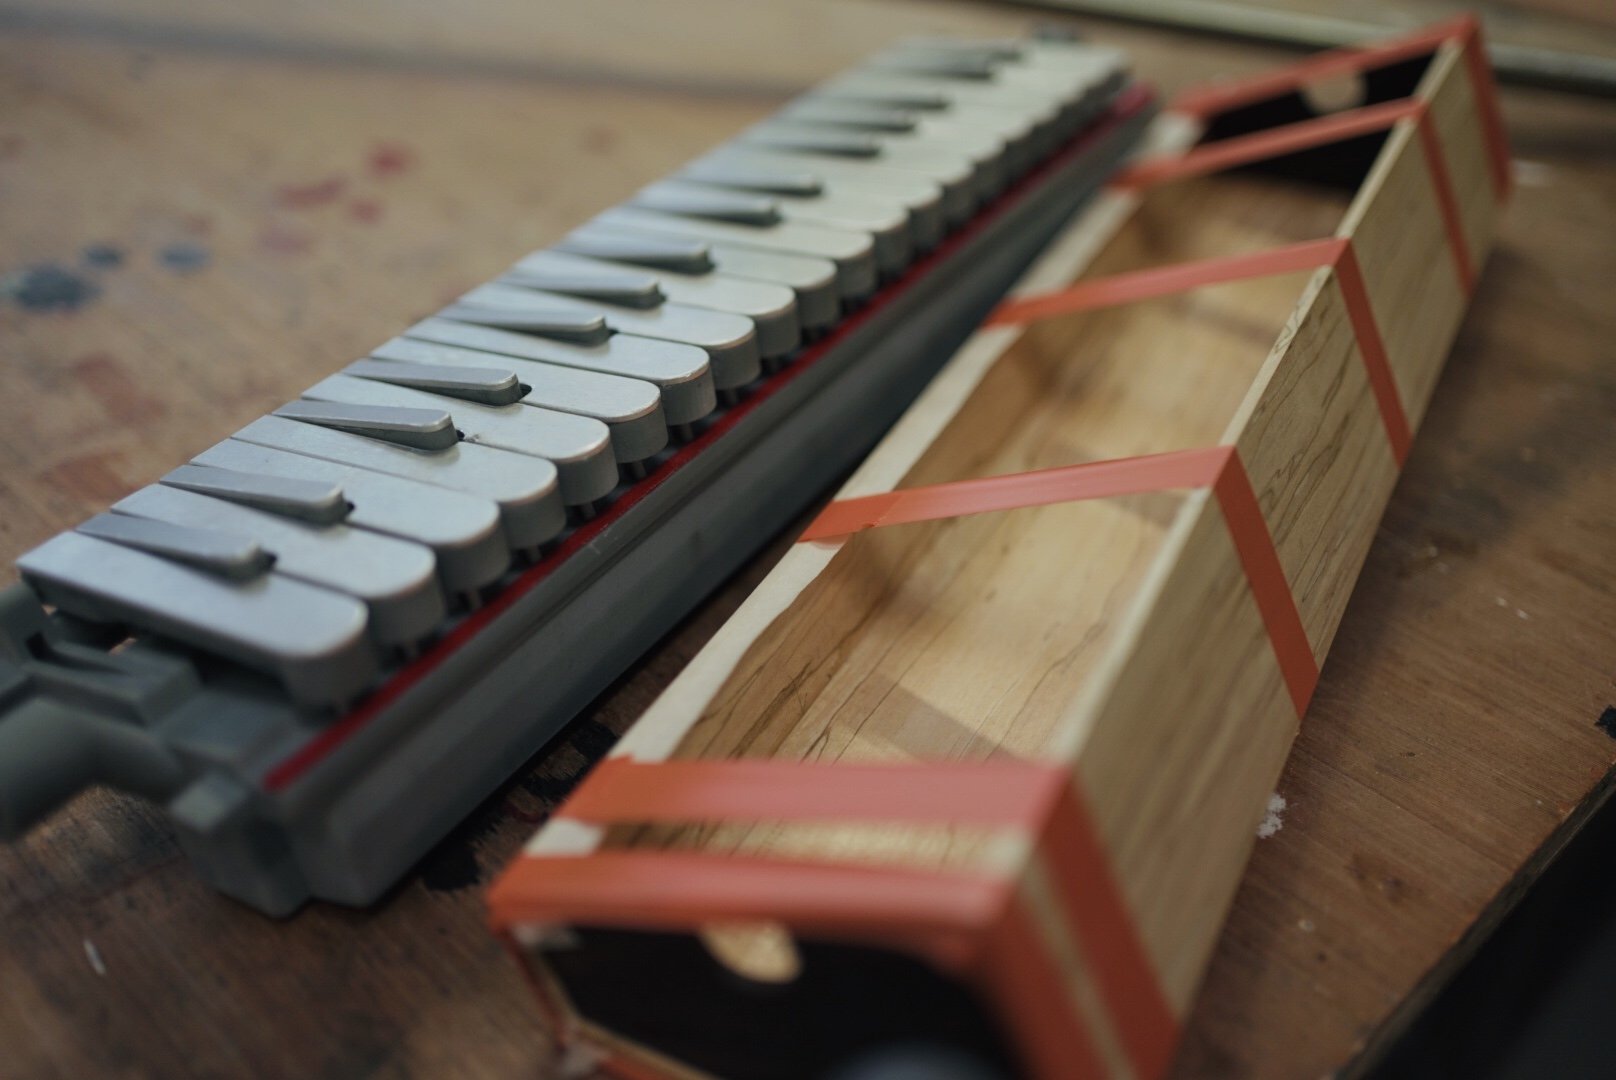 Wooden melodica